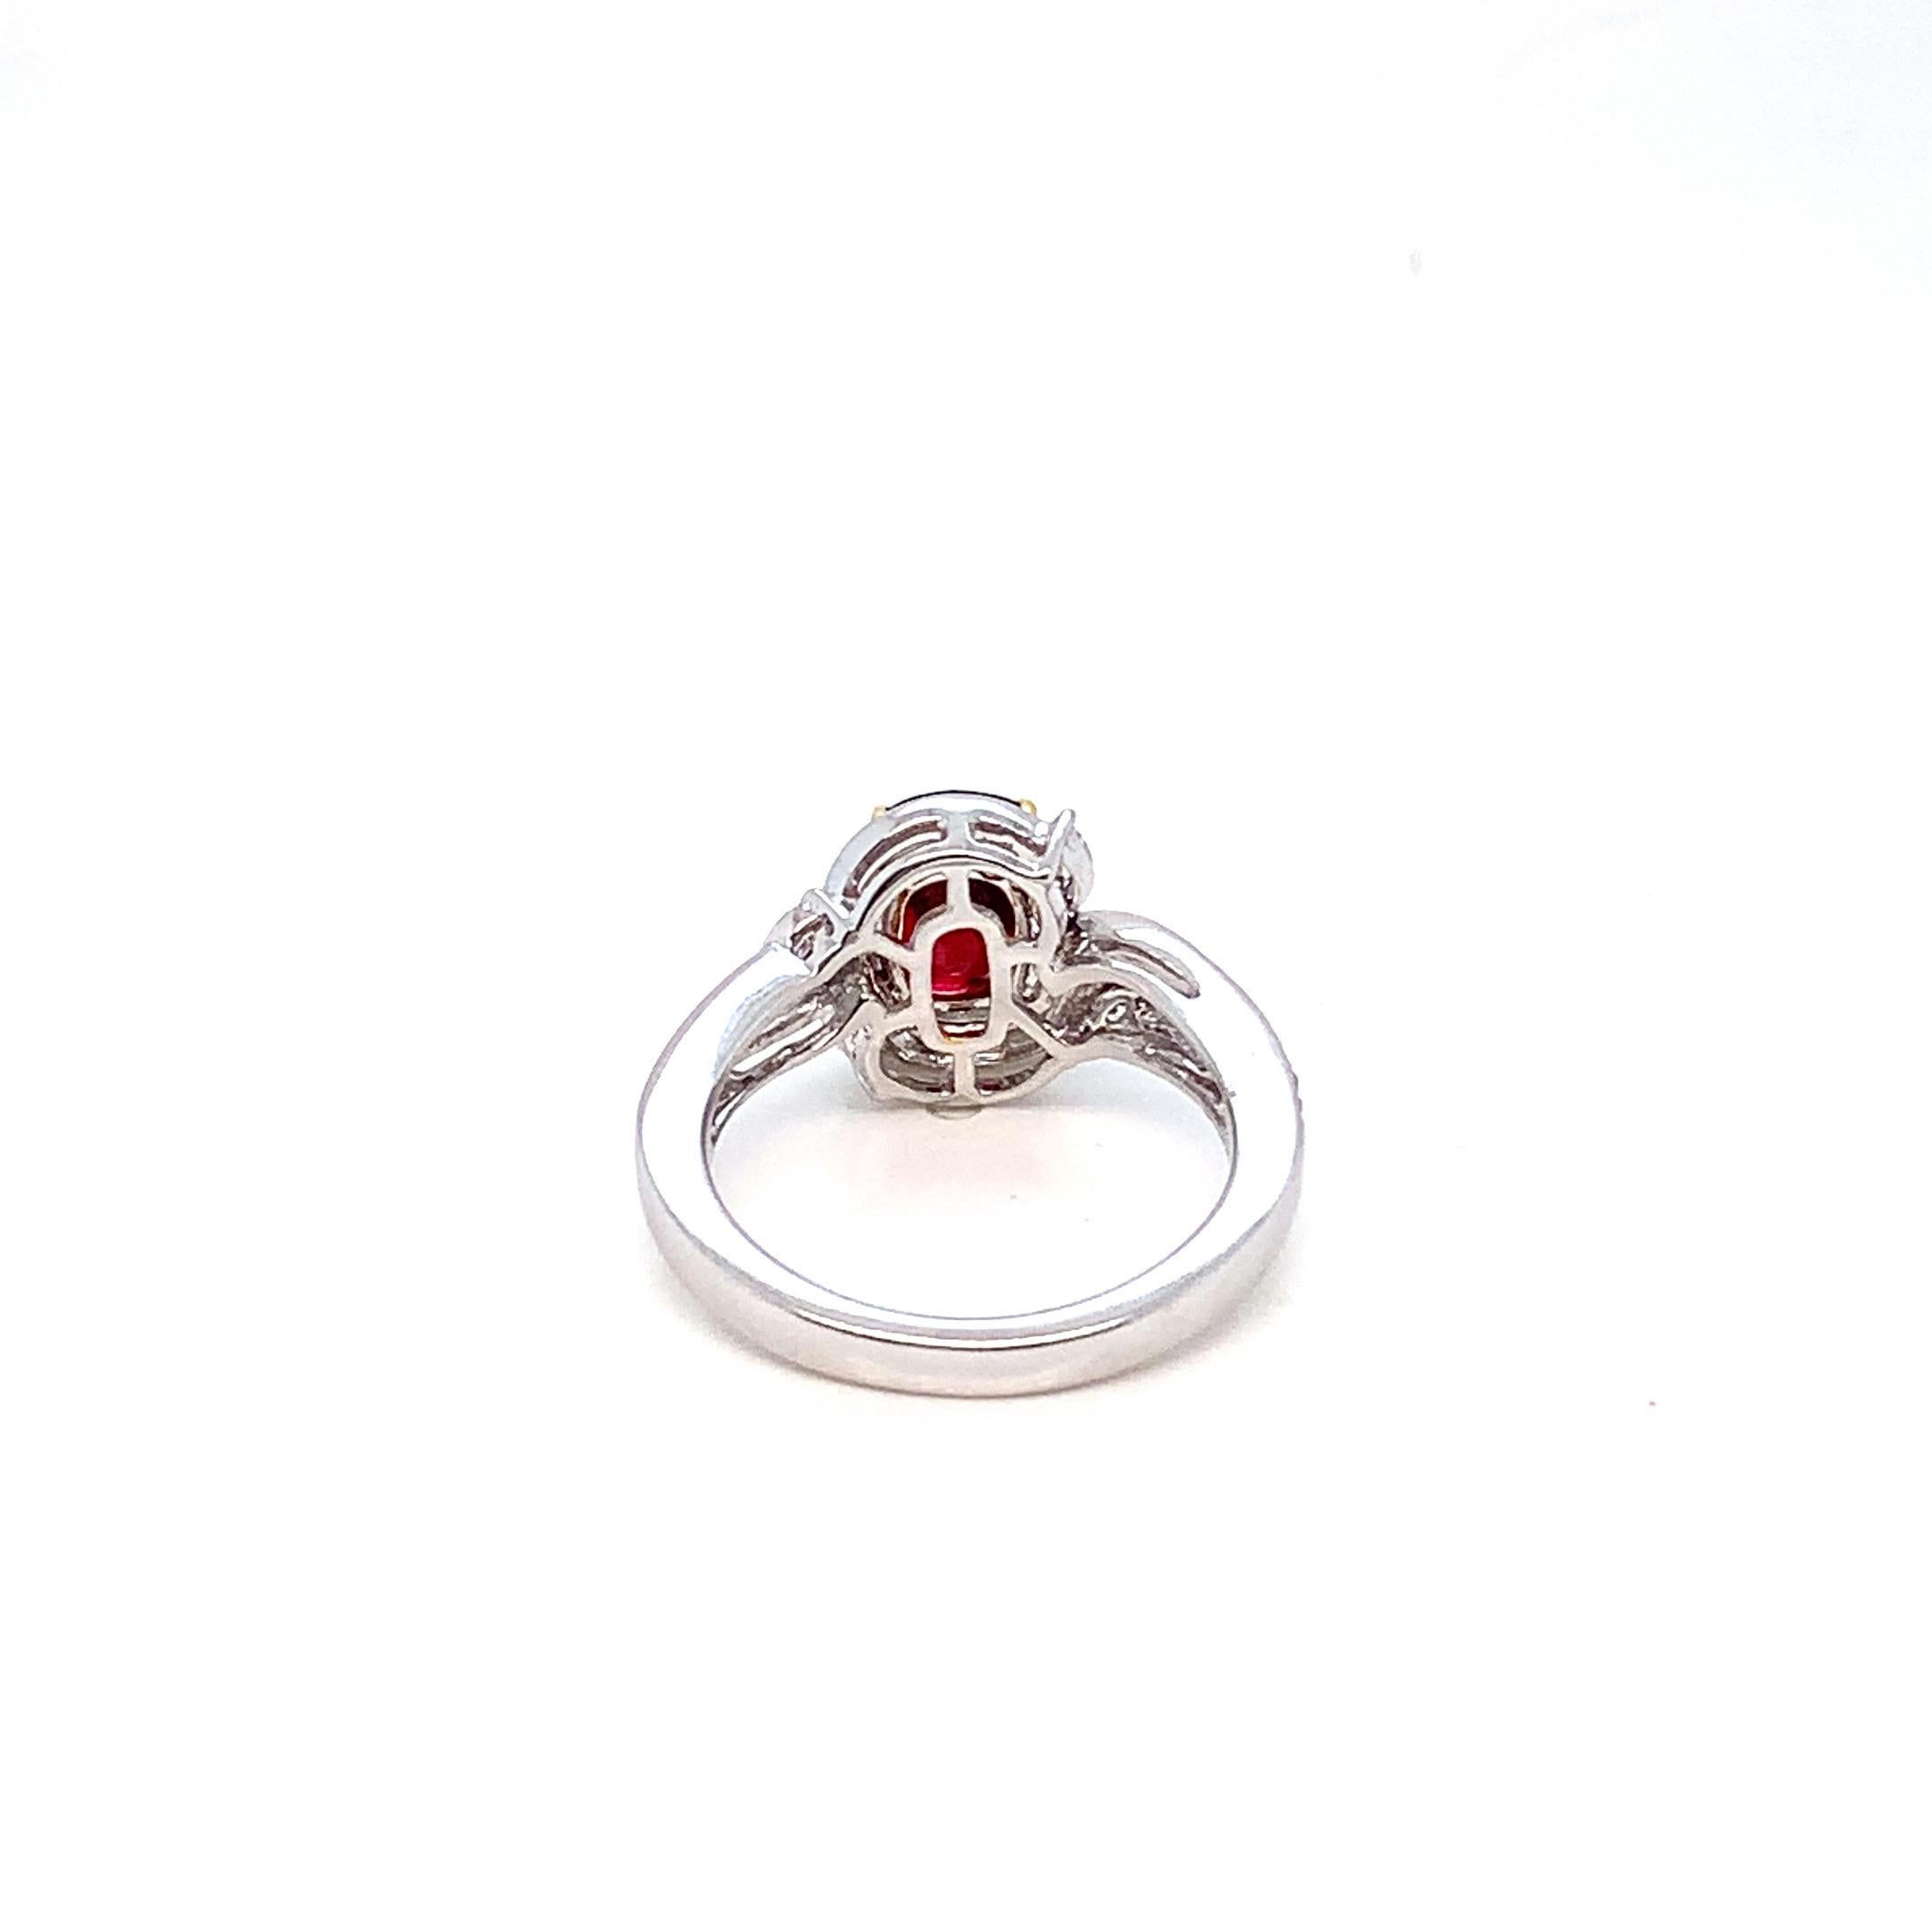 Presenting an exquisite creation from Rewa Jewelry, this ruby and diamond engagement ring is a timeless tribute to classic elegance, designed to symbolize the enduring beauty of love.

Inspired by classic styles, the ring features a resplendent